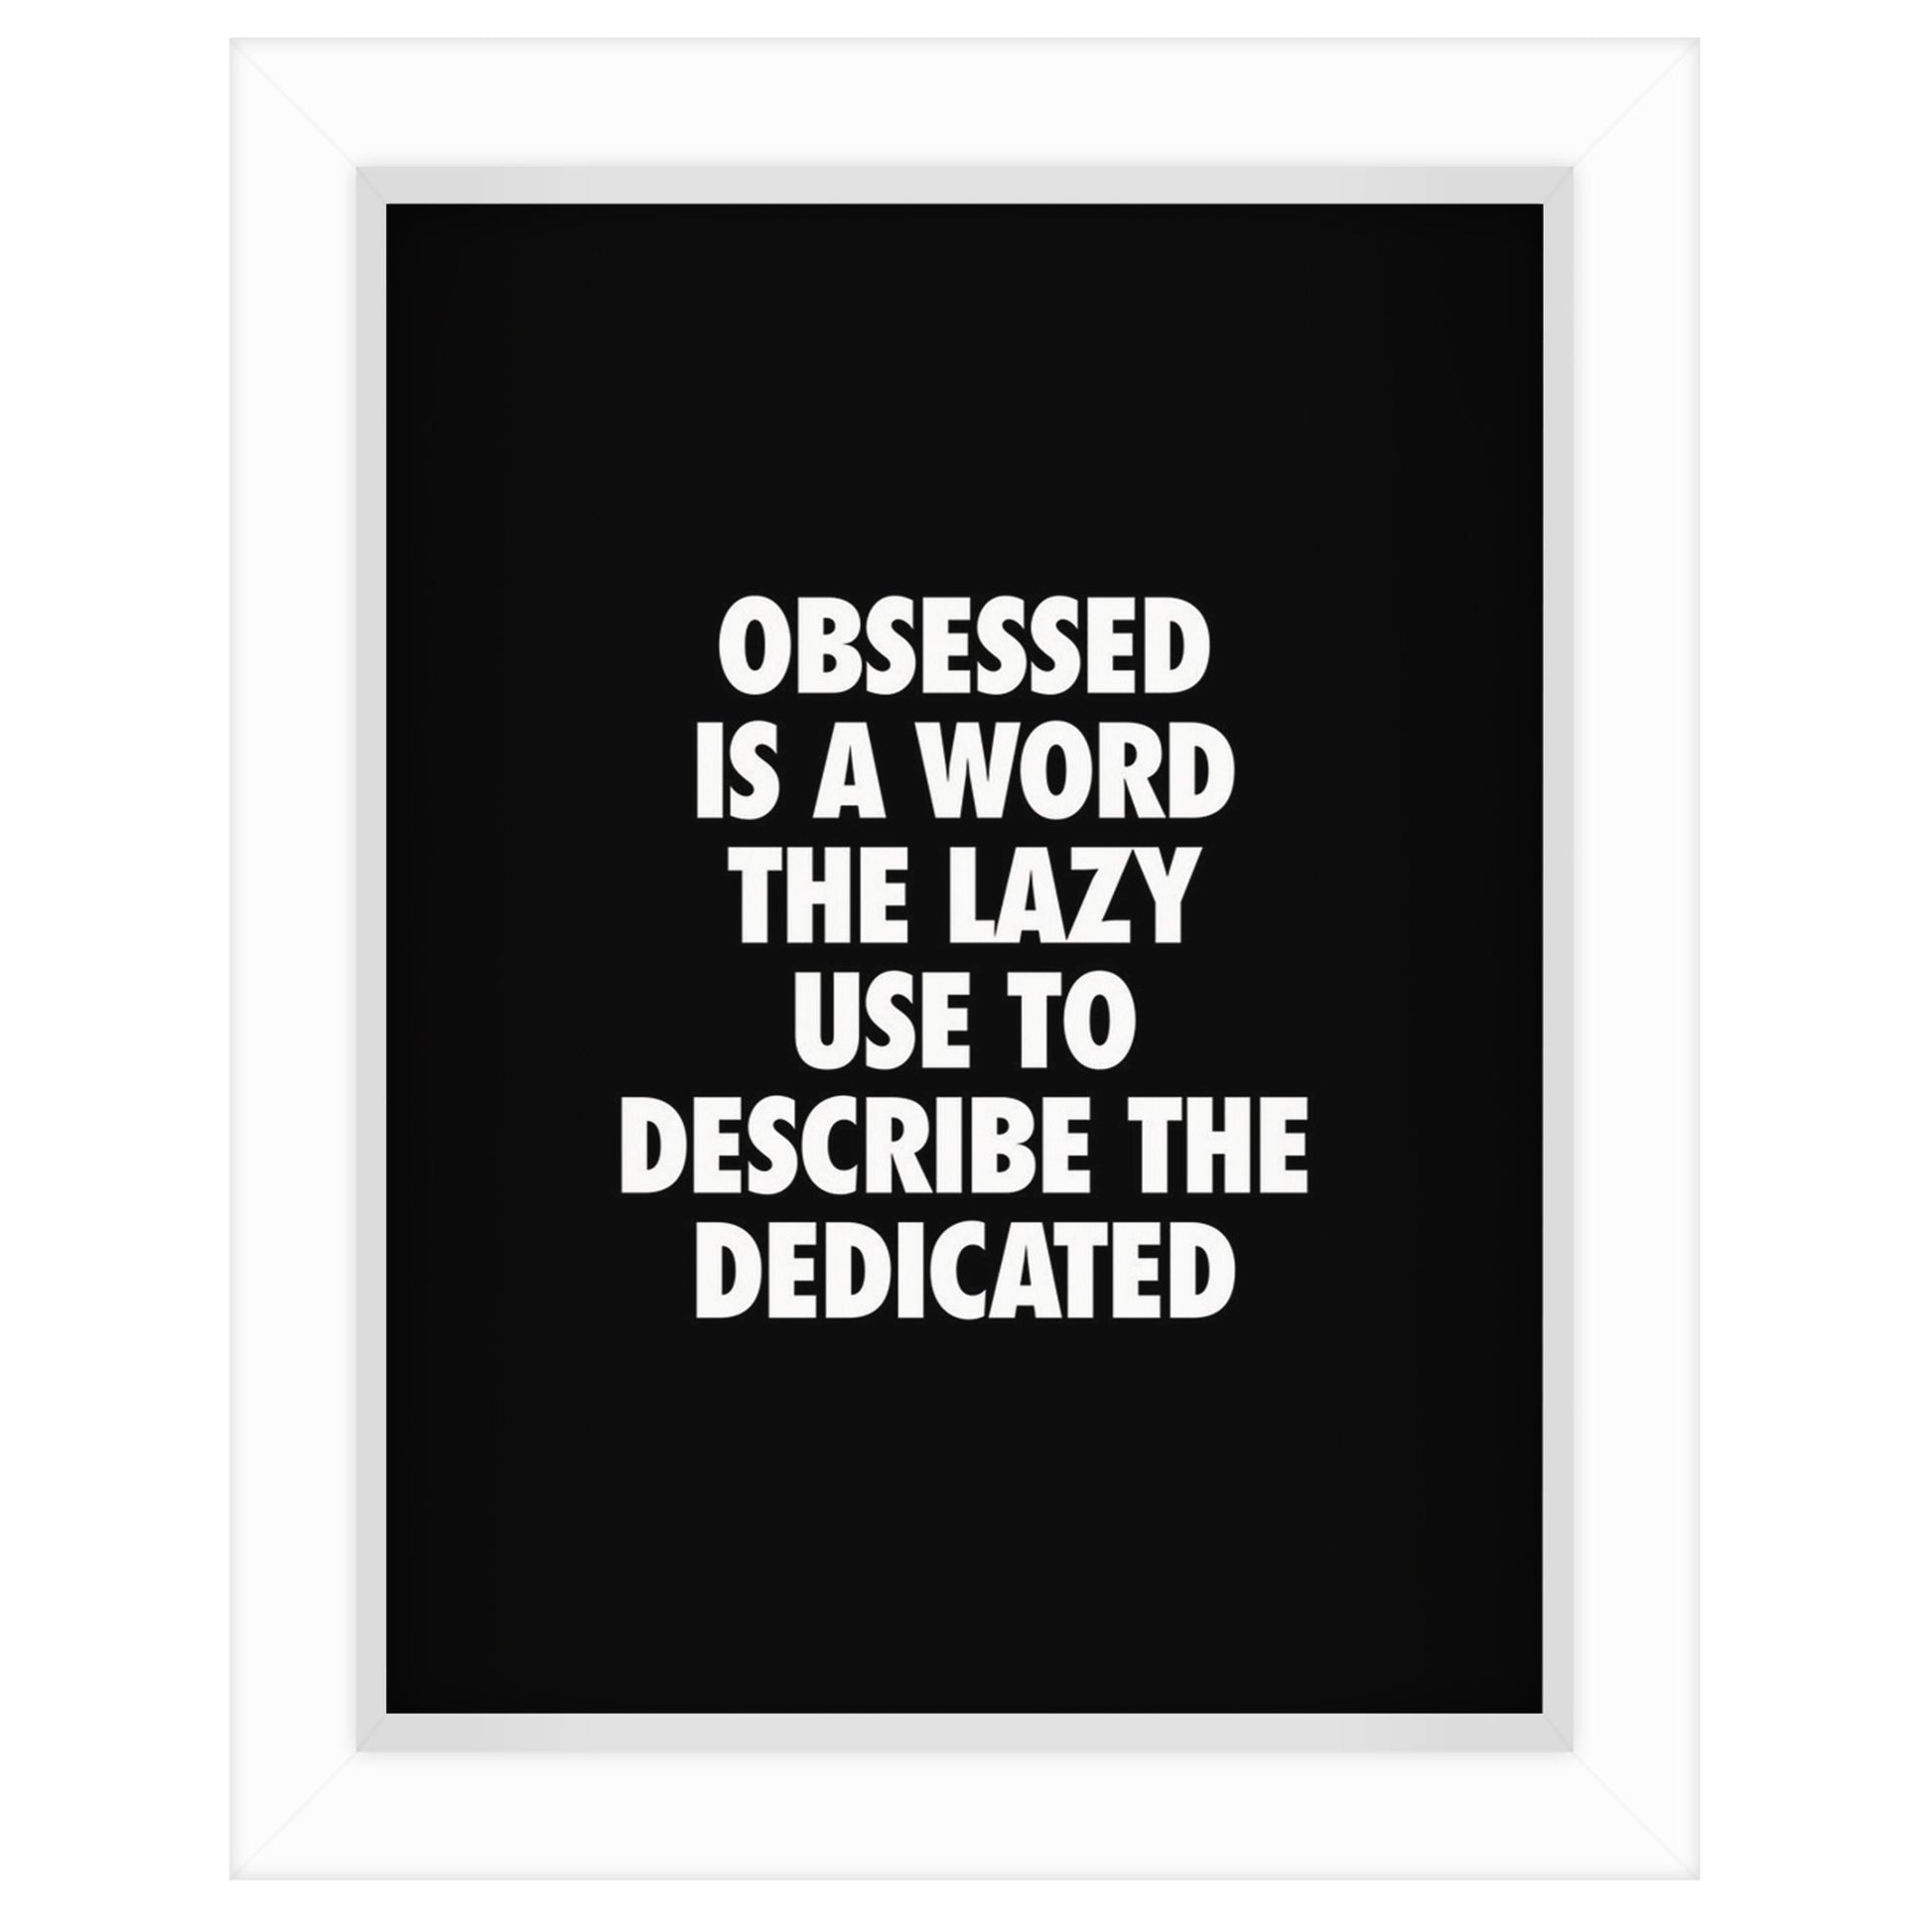 Obsessed Is A Word The Lazy Use By Motivated Type - Shadow Box Framed Art - Americanflat